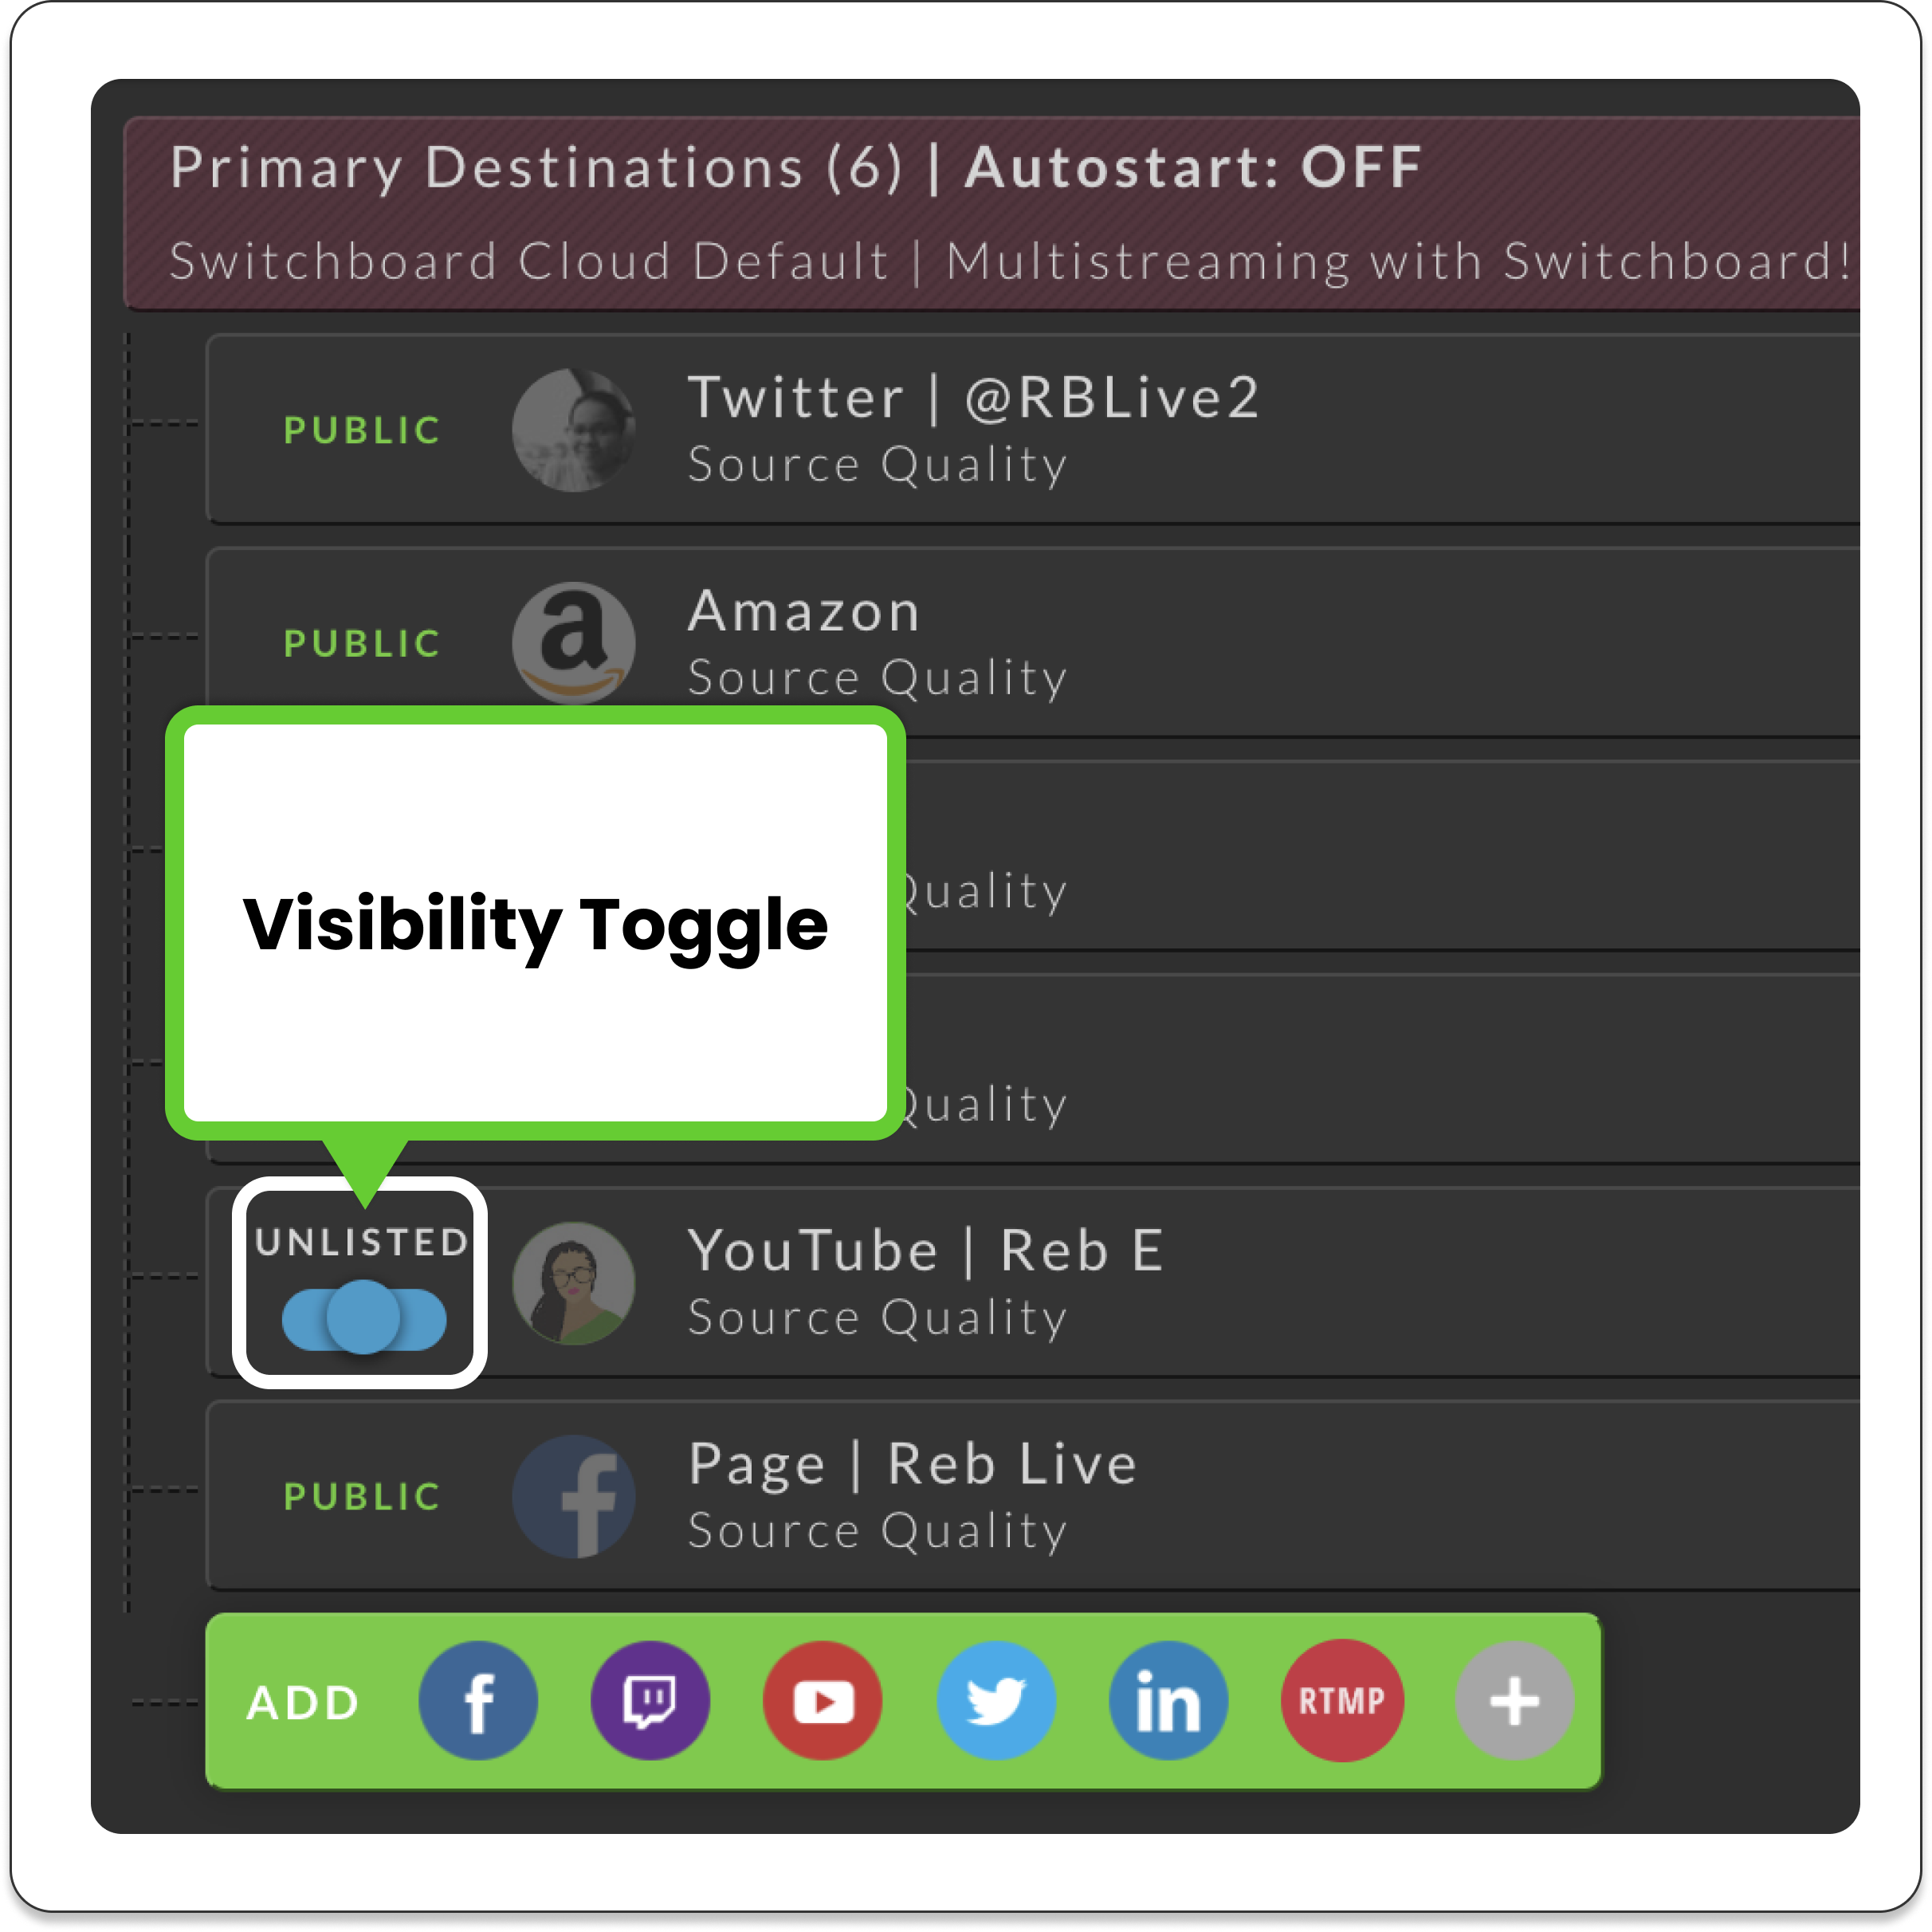 switchboardlive_workflow-page_destinations_pane_visibility_toggle_unlisted.png